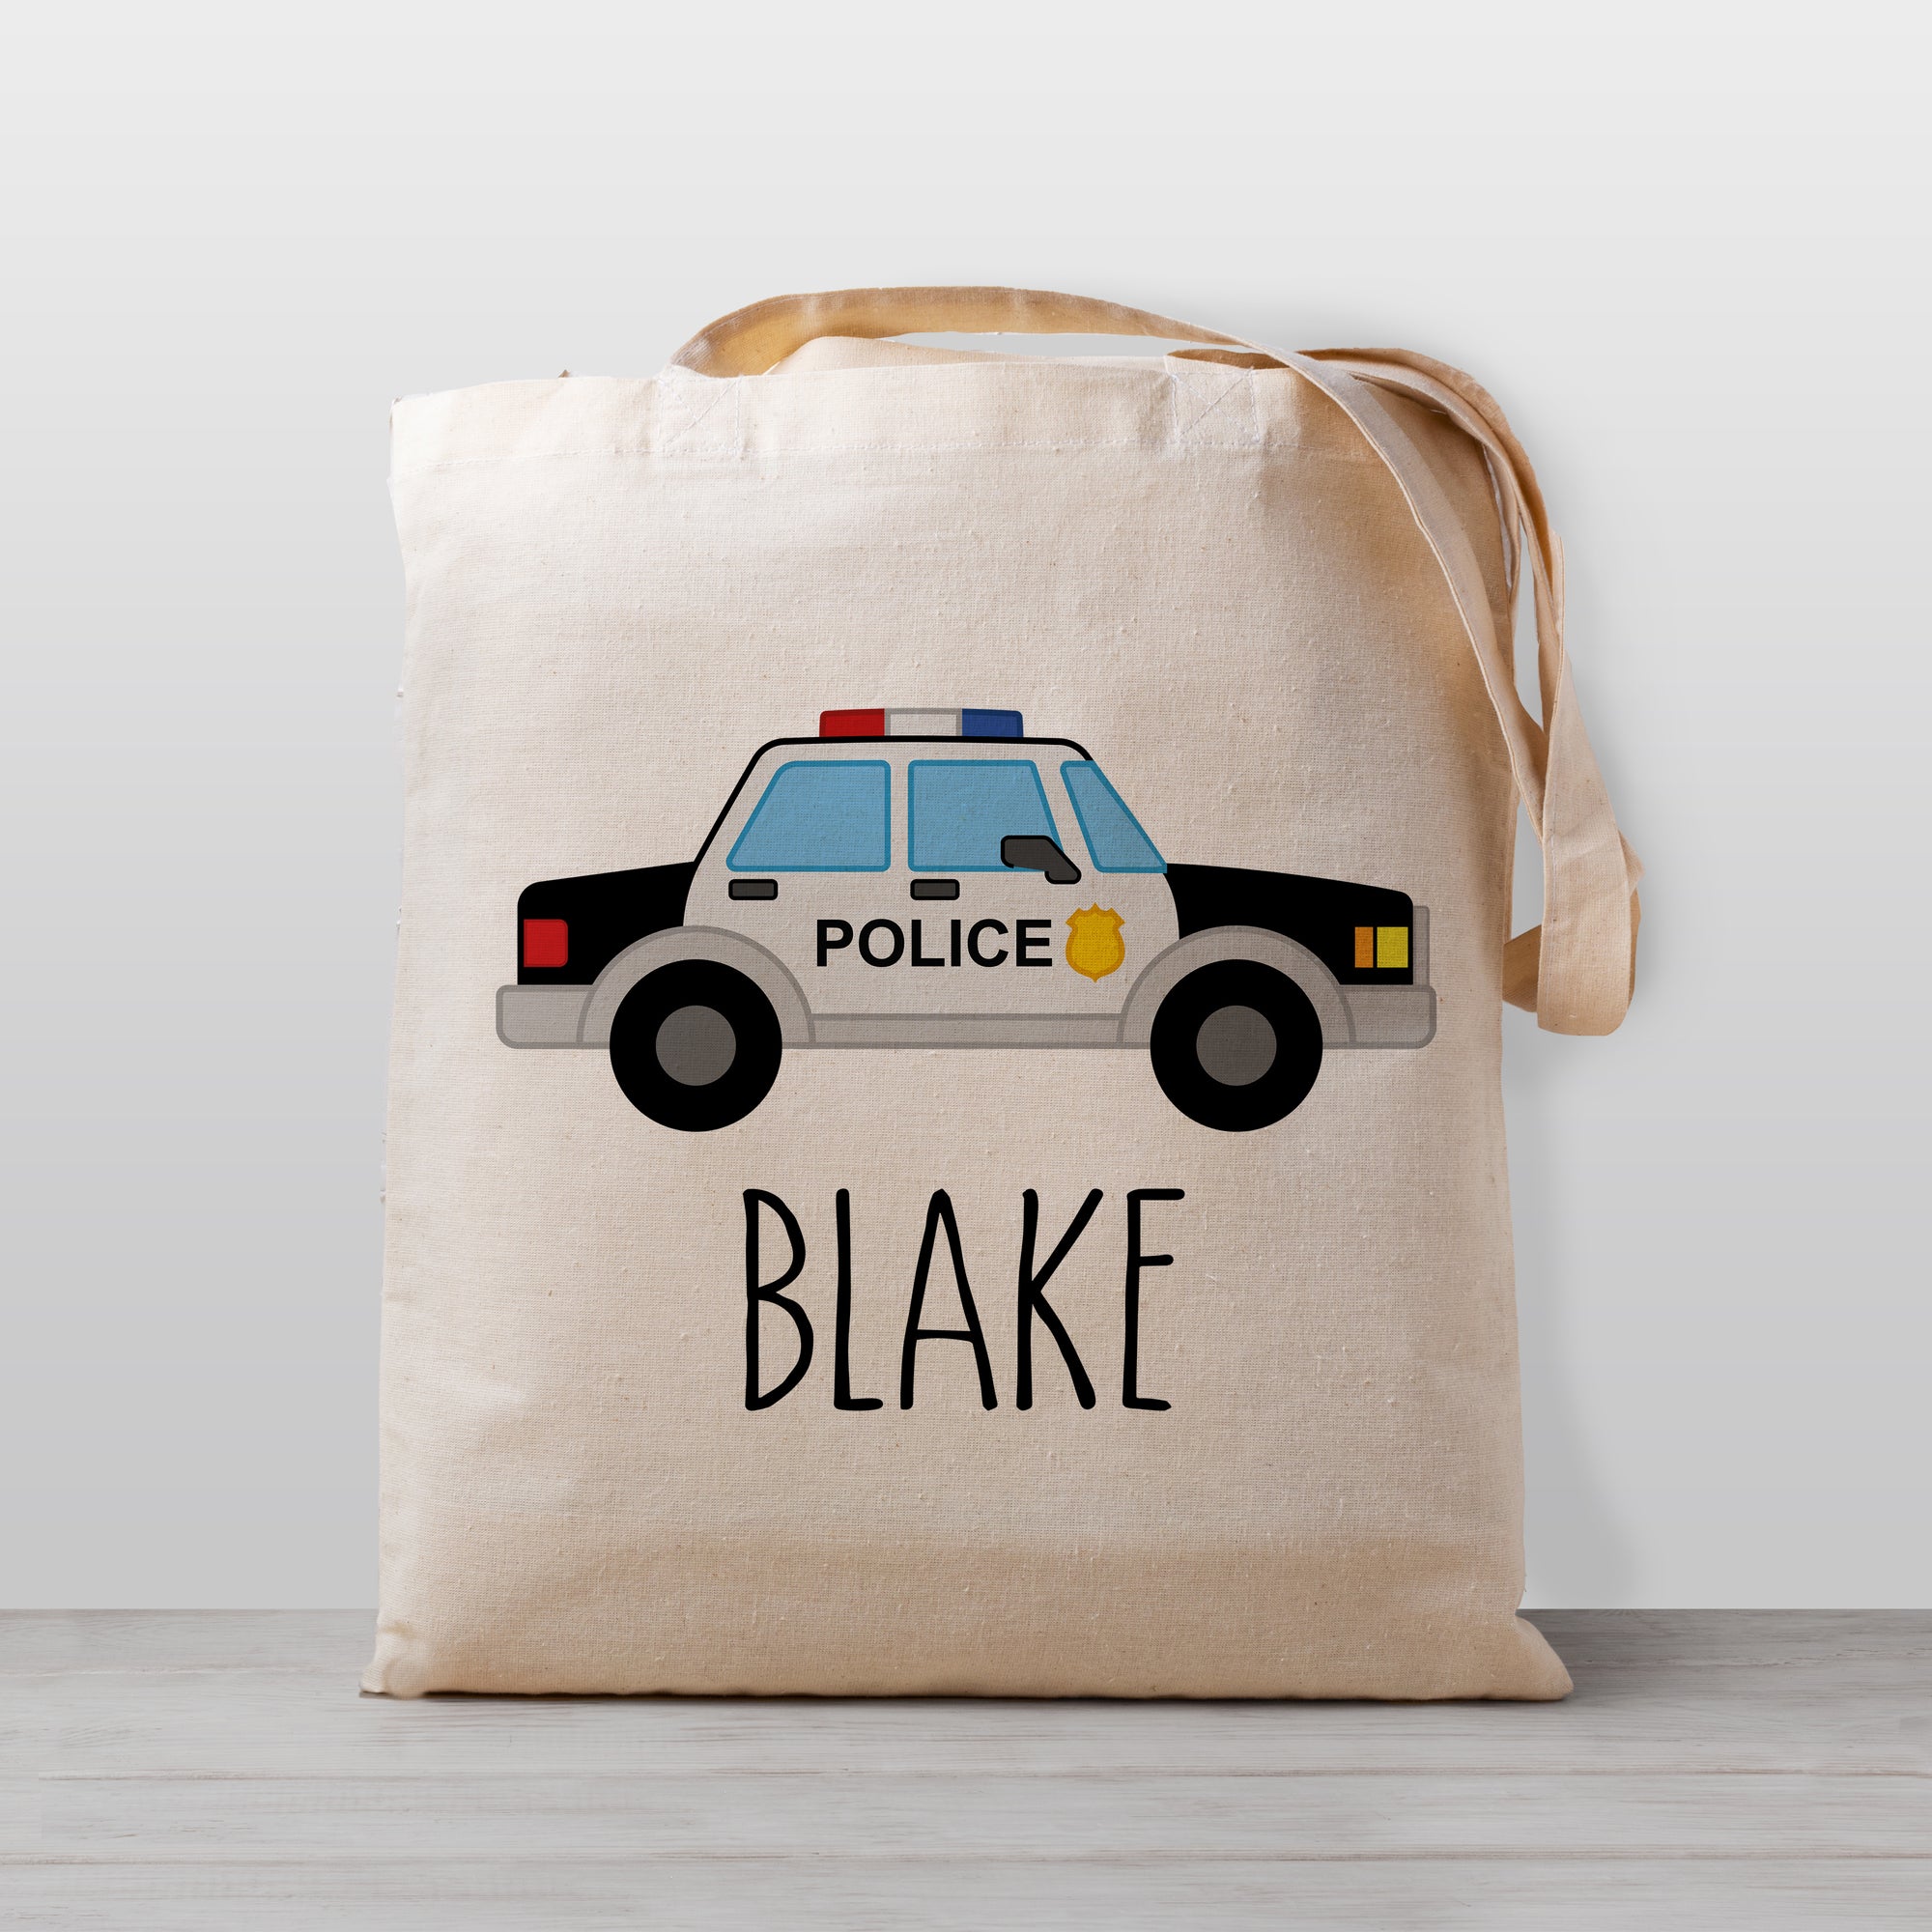 police car tote bag for boys and girls, personalized with name, 100% cotton canvas, popular for daycare, preschool, and carrying toys in the car